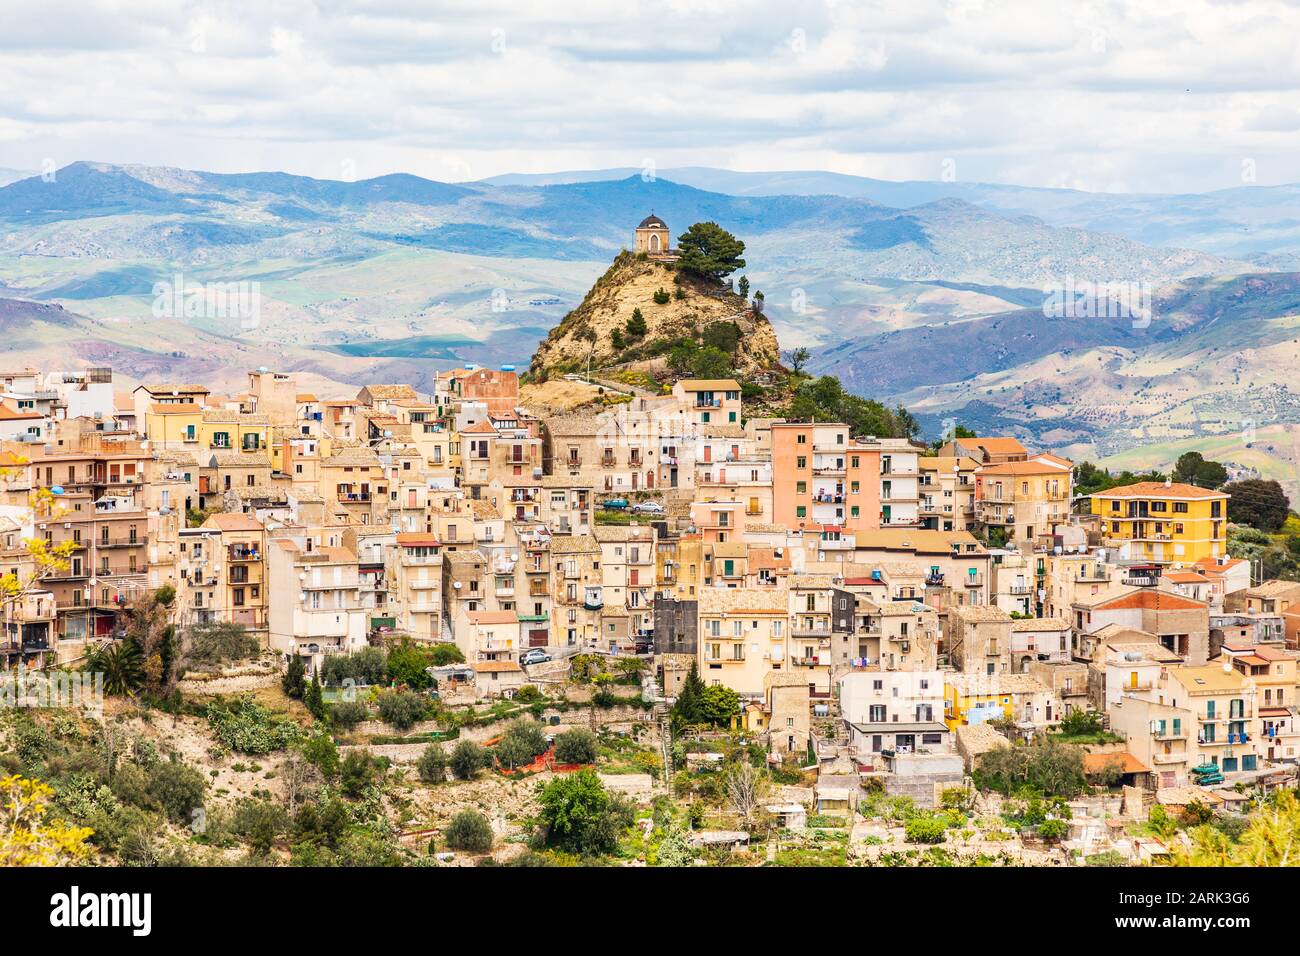 Italy, Sicily, Enna Province, Centuripe.  The ancient town of Centuripe in eastern Sicily. The town is pre-Roman, dating back to the 5th century BC. Stock Photo